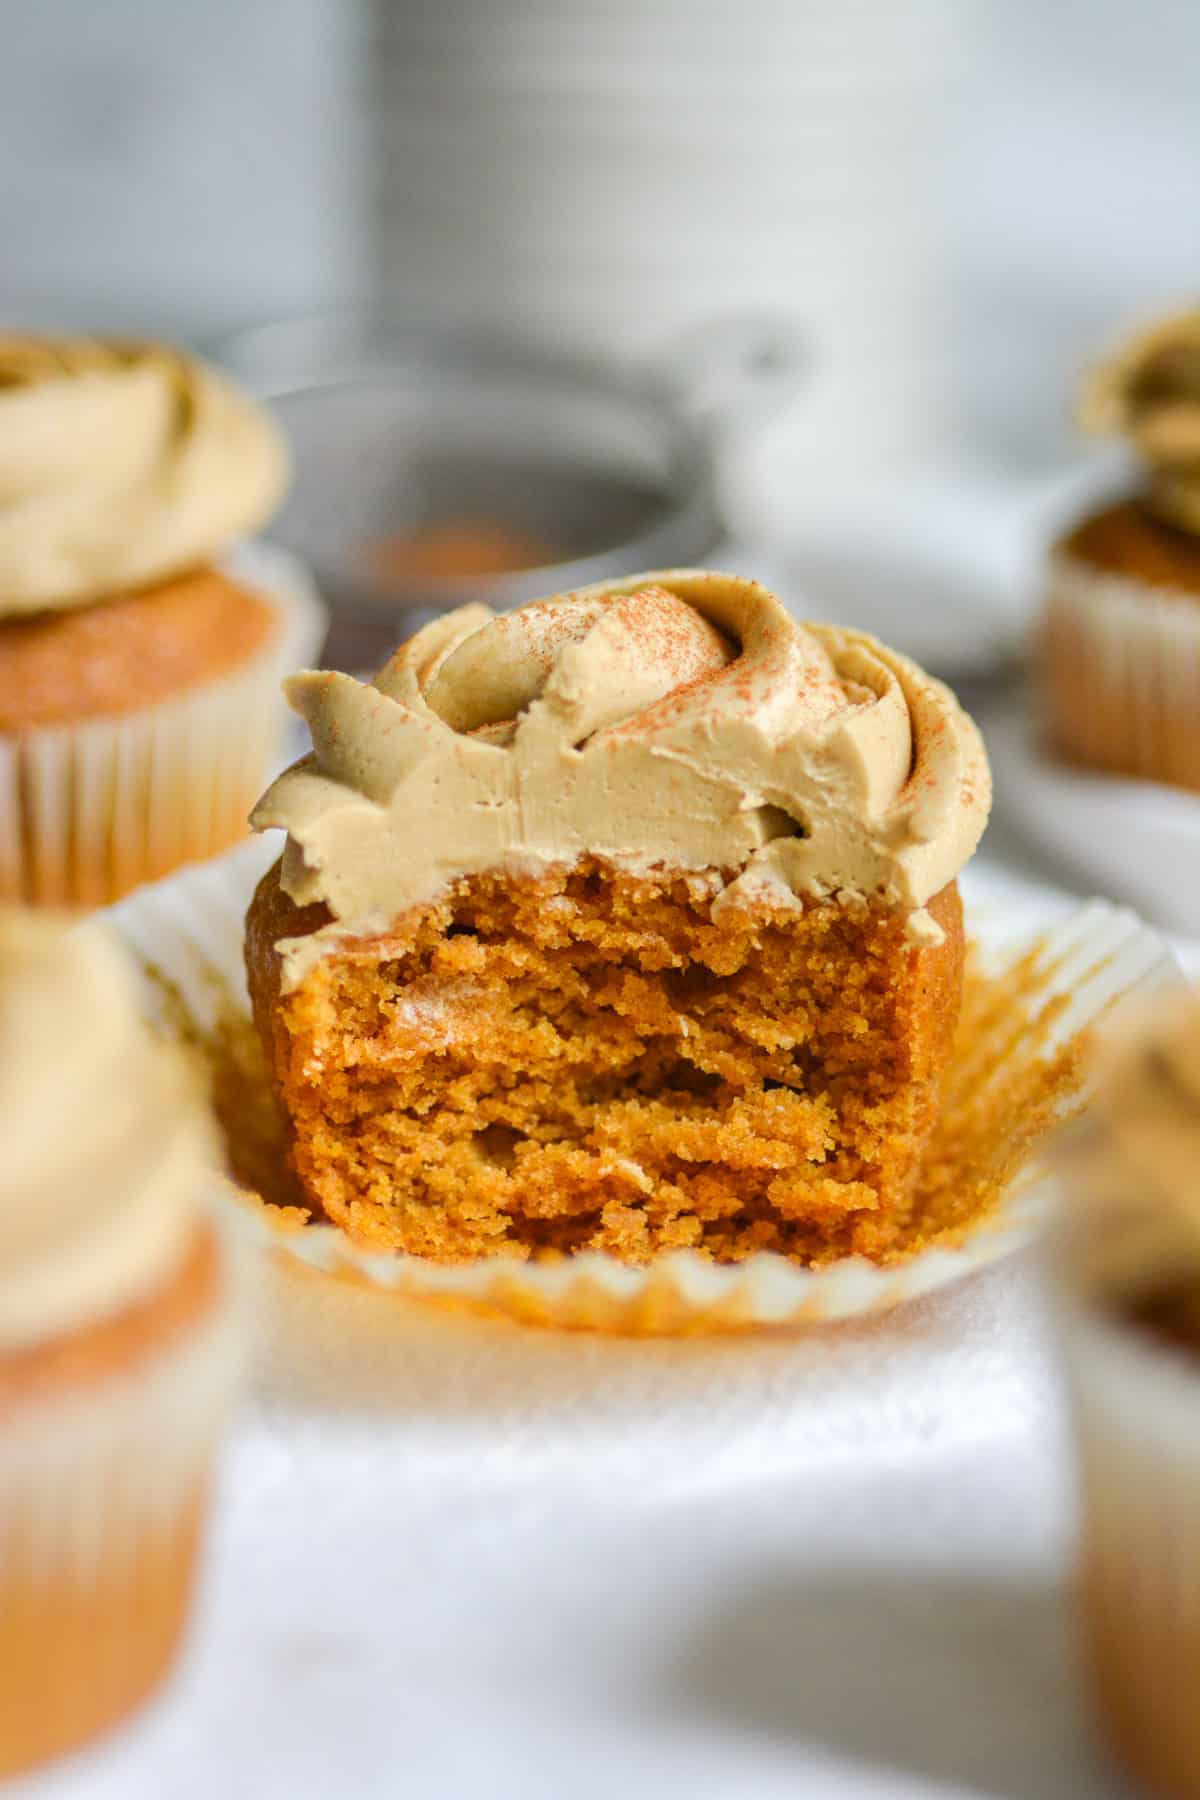 A vegan pumpkin chai cupcake with a bite taken out of it sitting in a cupcake wrapper.